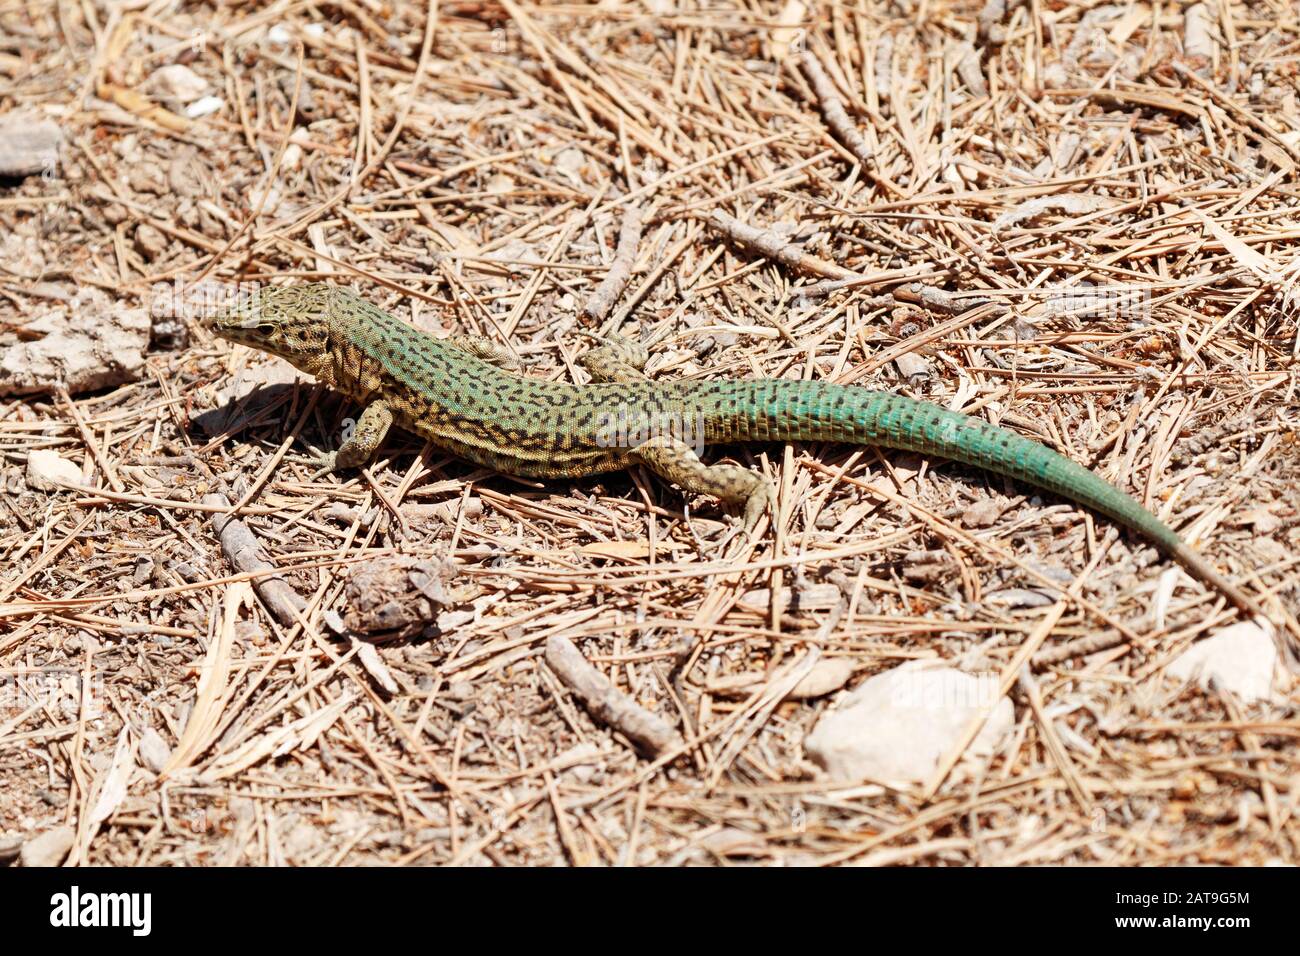 Lilford's wall lizard (Podarcis lilfordi ) is a species of lizard in the family Lacertidae. The species is endemic to the Balearic Islands, Spain. Stock Photo